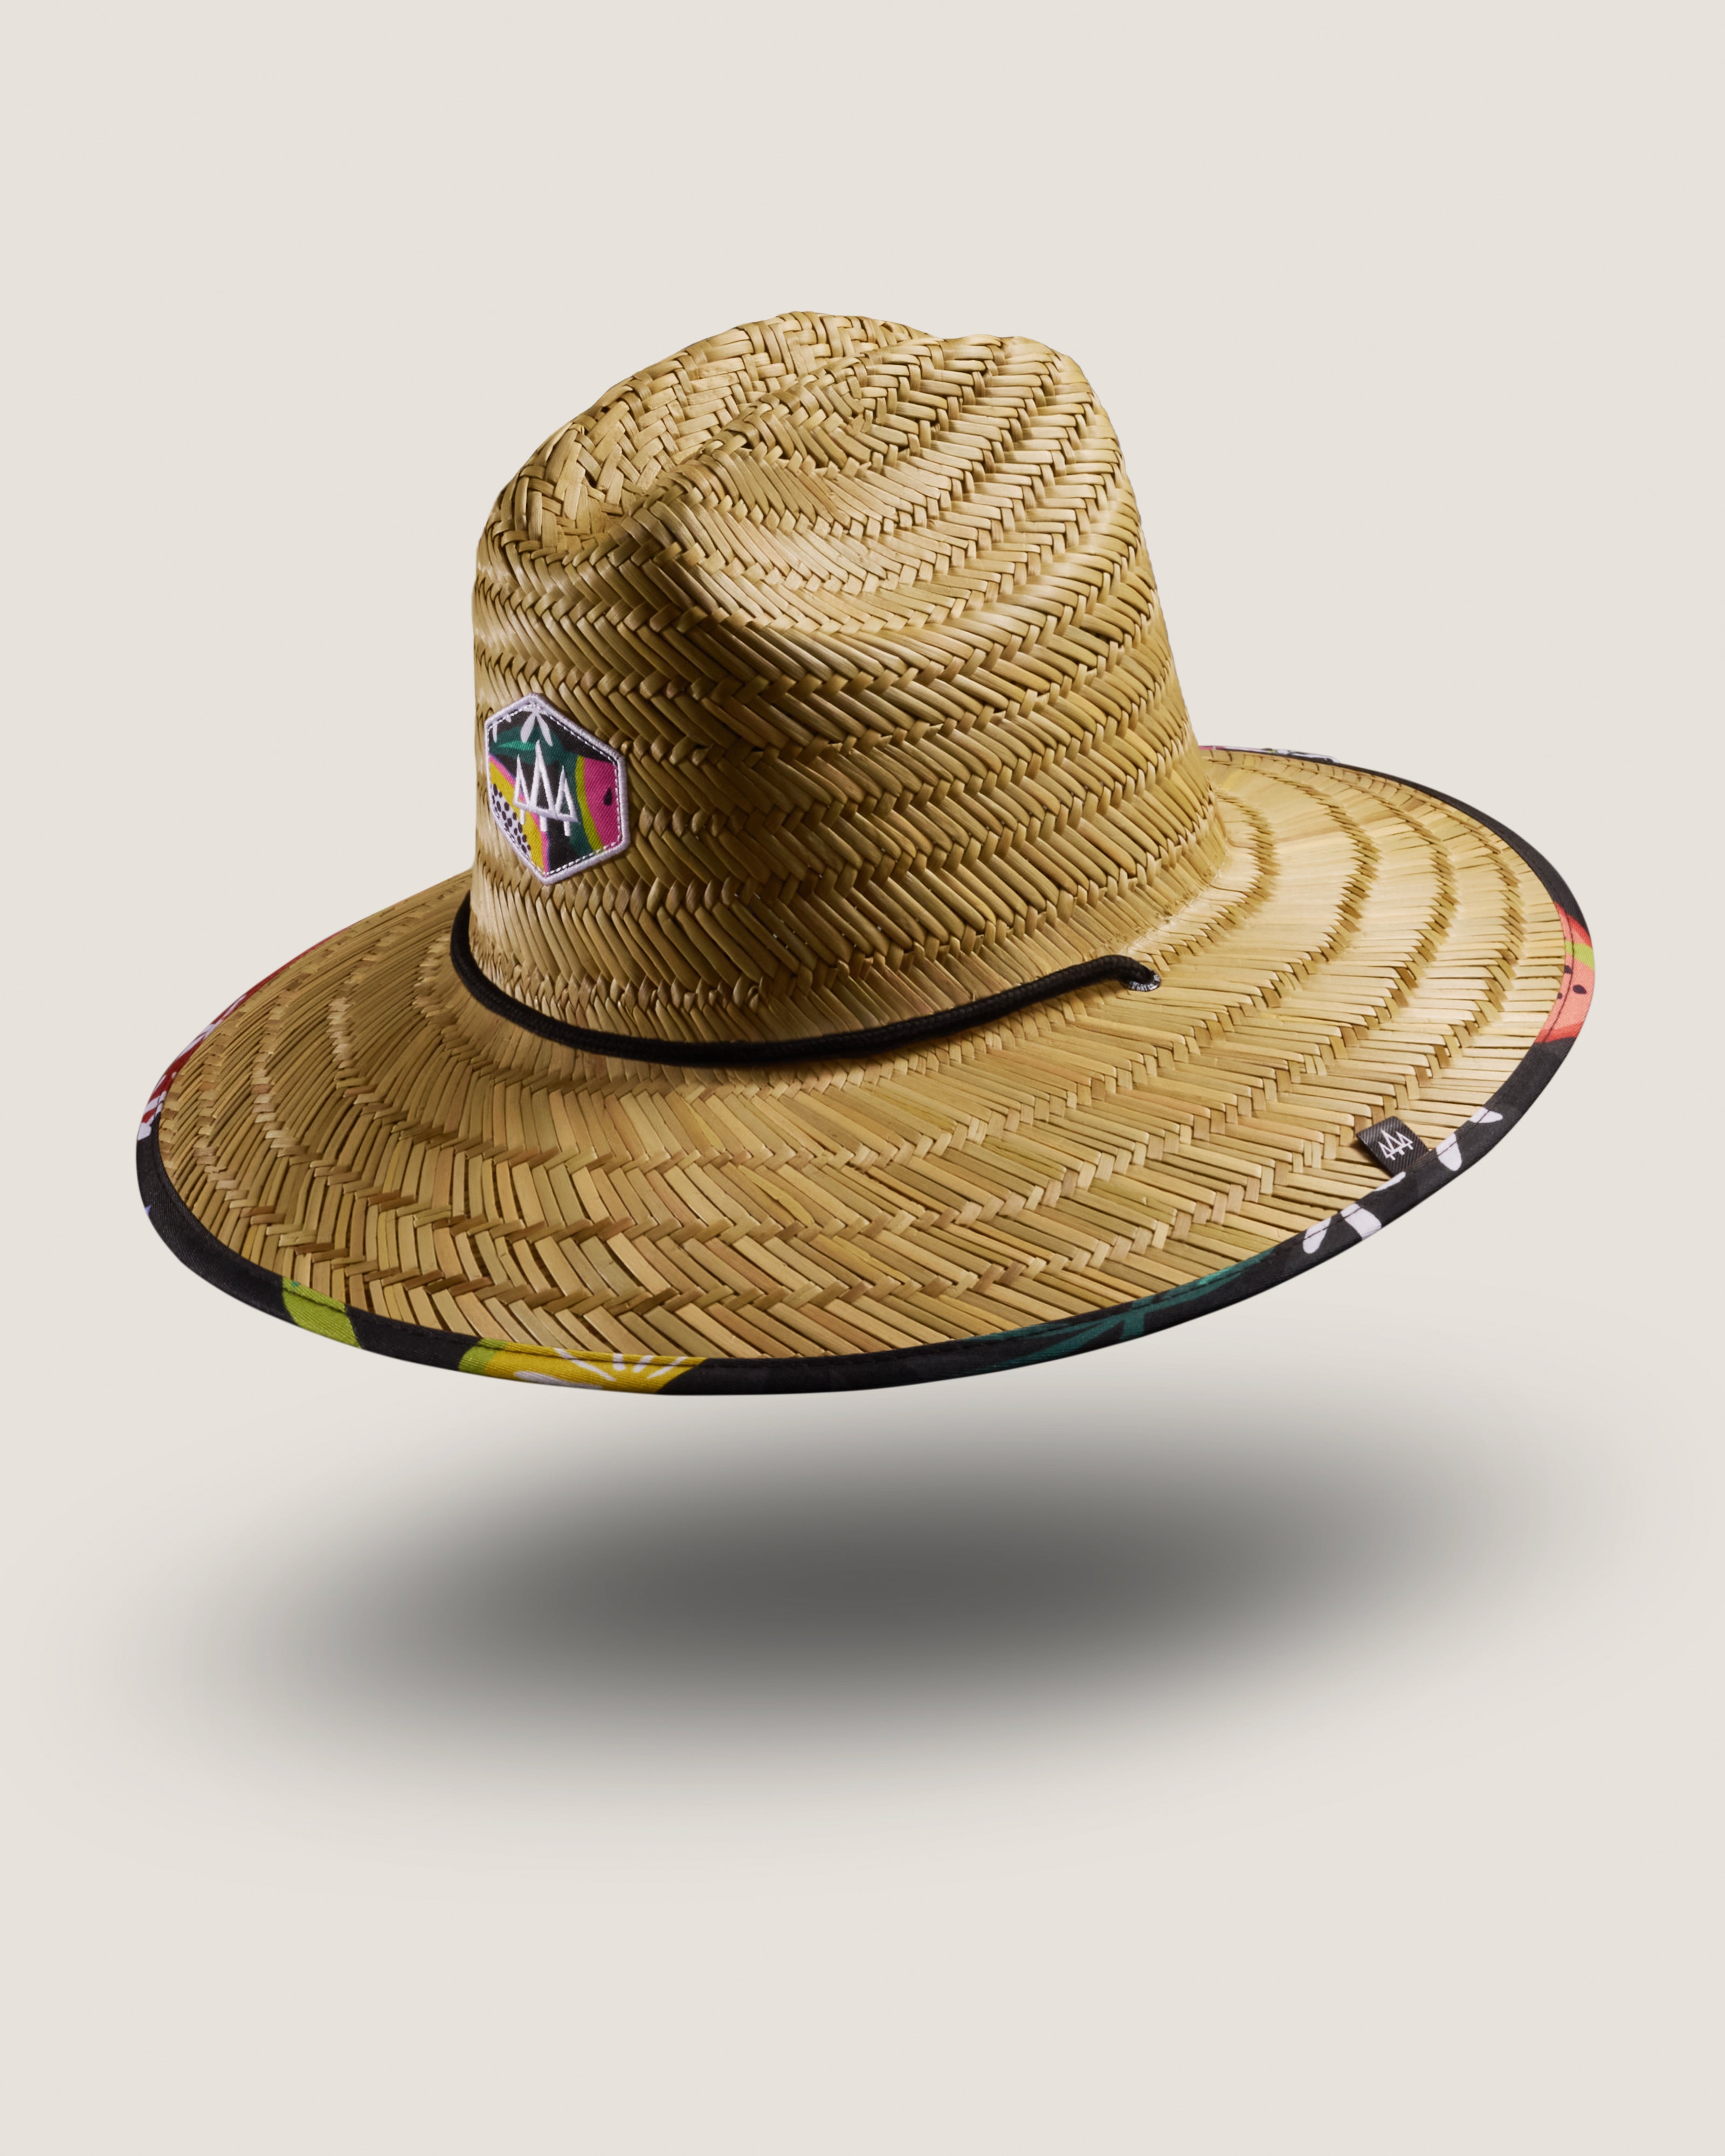 Hemlock Blend straw lifeguard hat with fruit pattern with patch